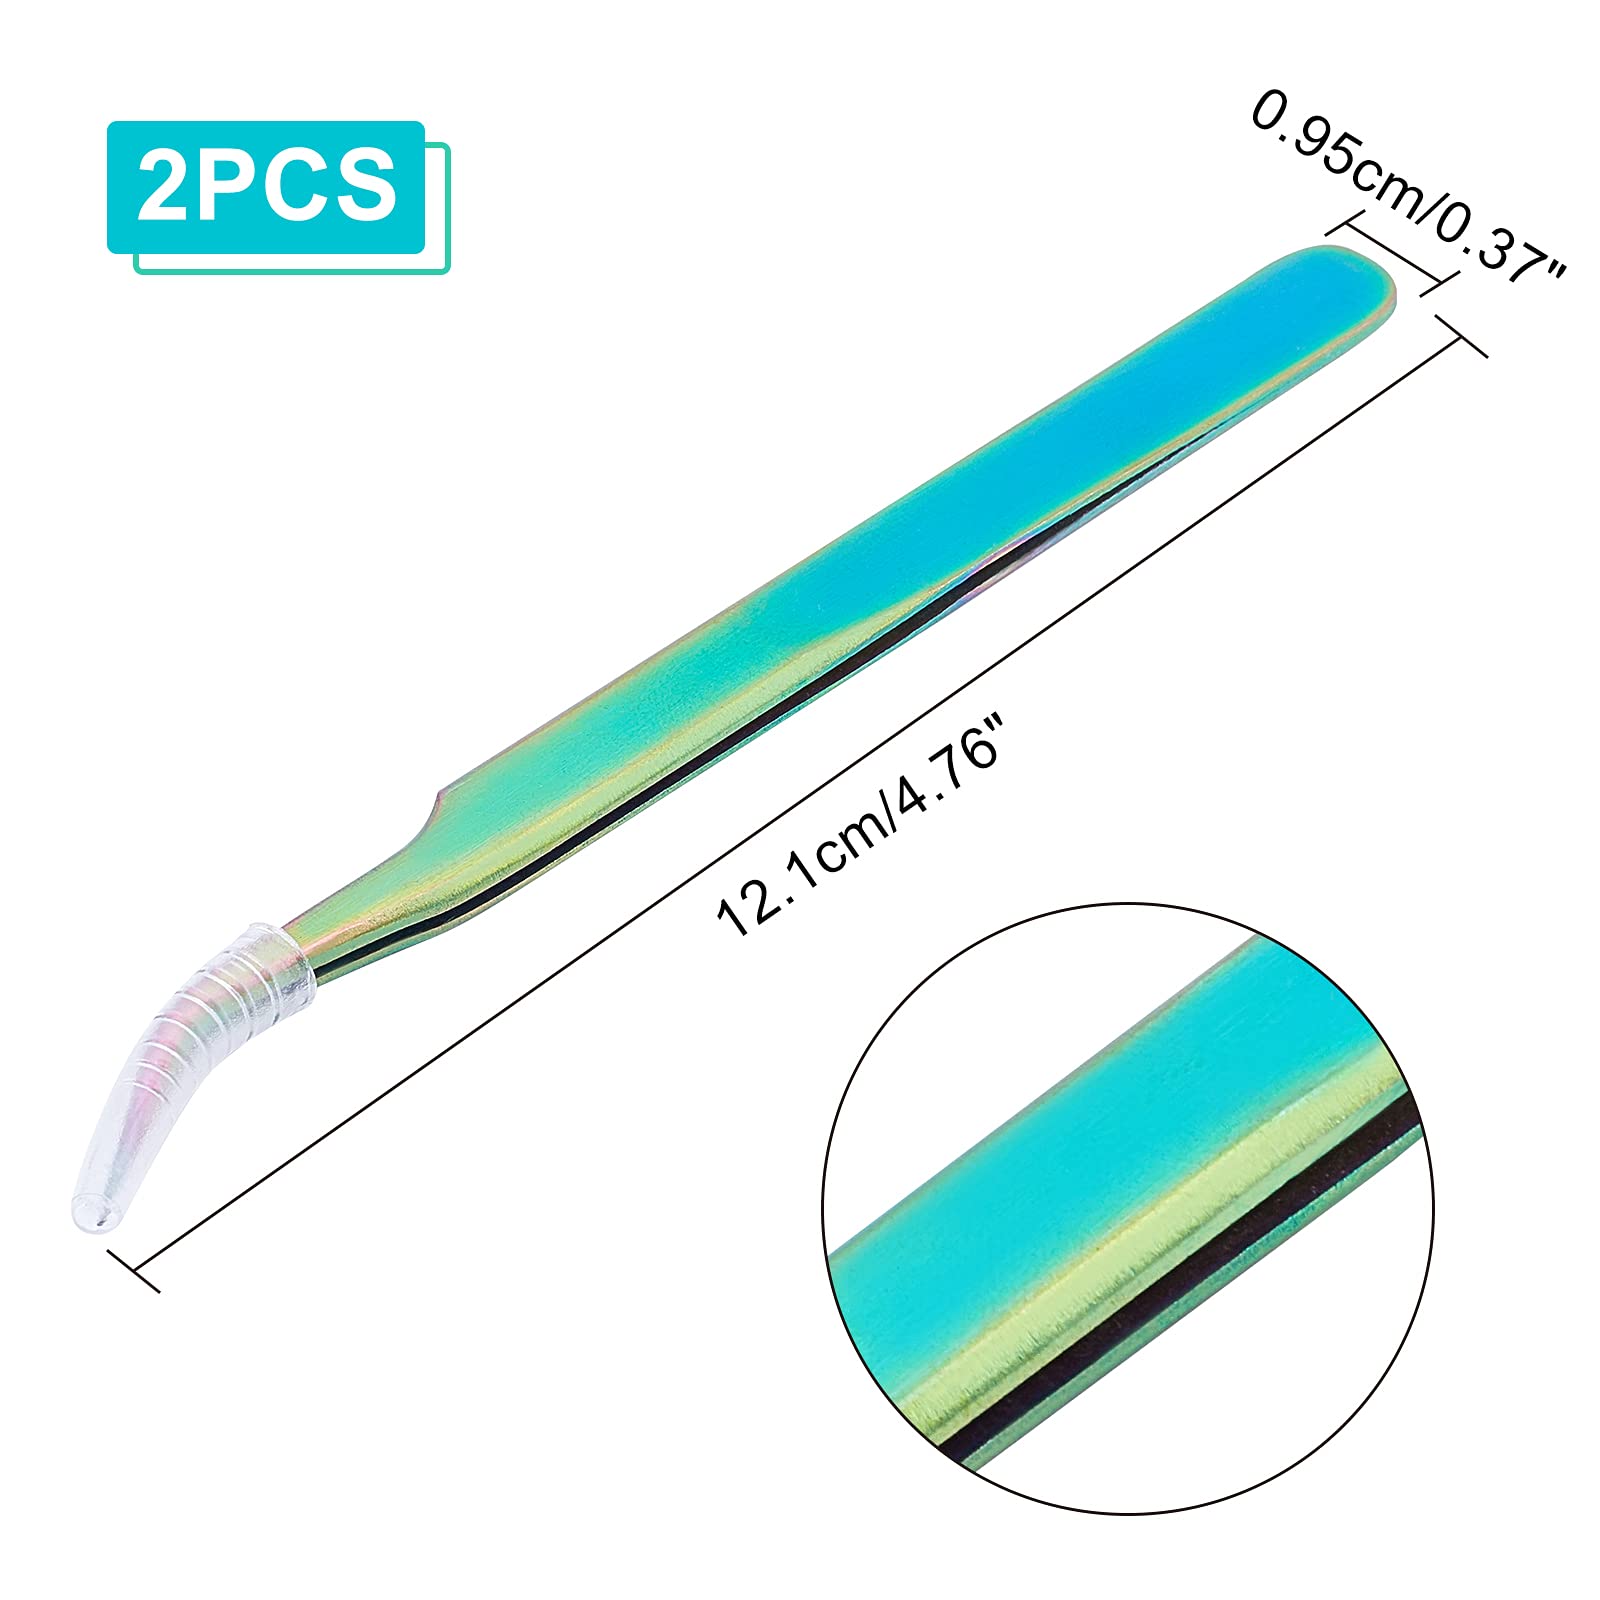 UNICRAFTALE 2pcs Stainless Steel Curved Pointed Craft Tweezer Rainbow Sticker Picking Tool Tweezer for DIY Craft Precision Tweezers Jewelry Making Electronics and Laboratory Works 12.1x0.95cm